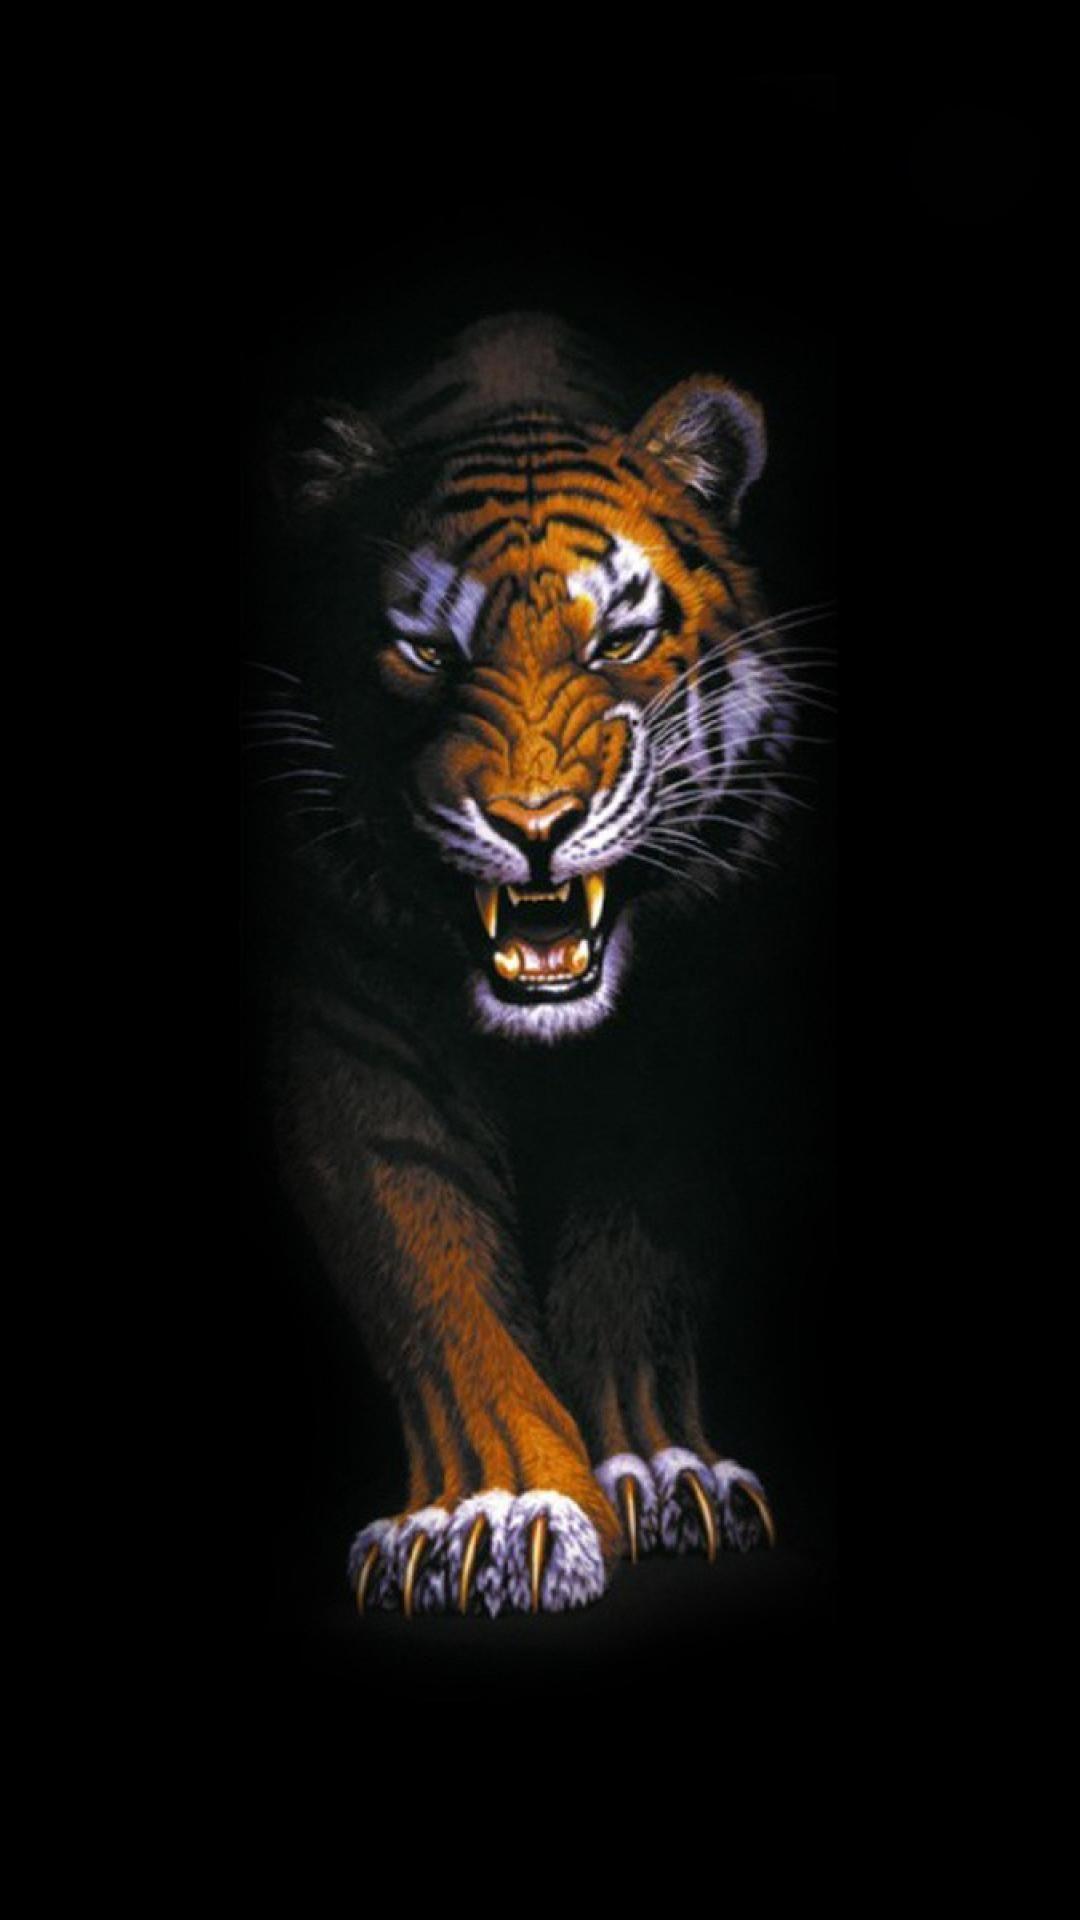 Tiger HD Wallpaper For Mobile